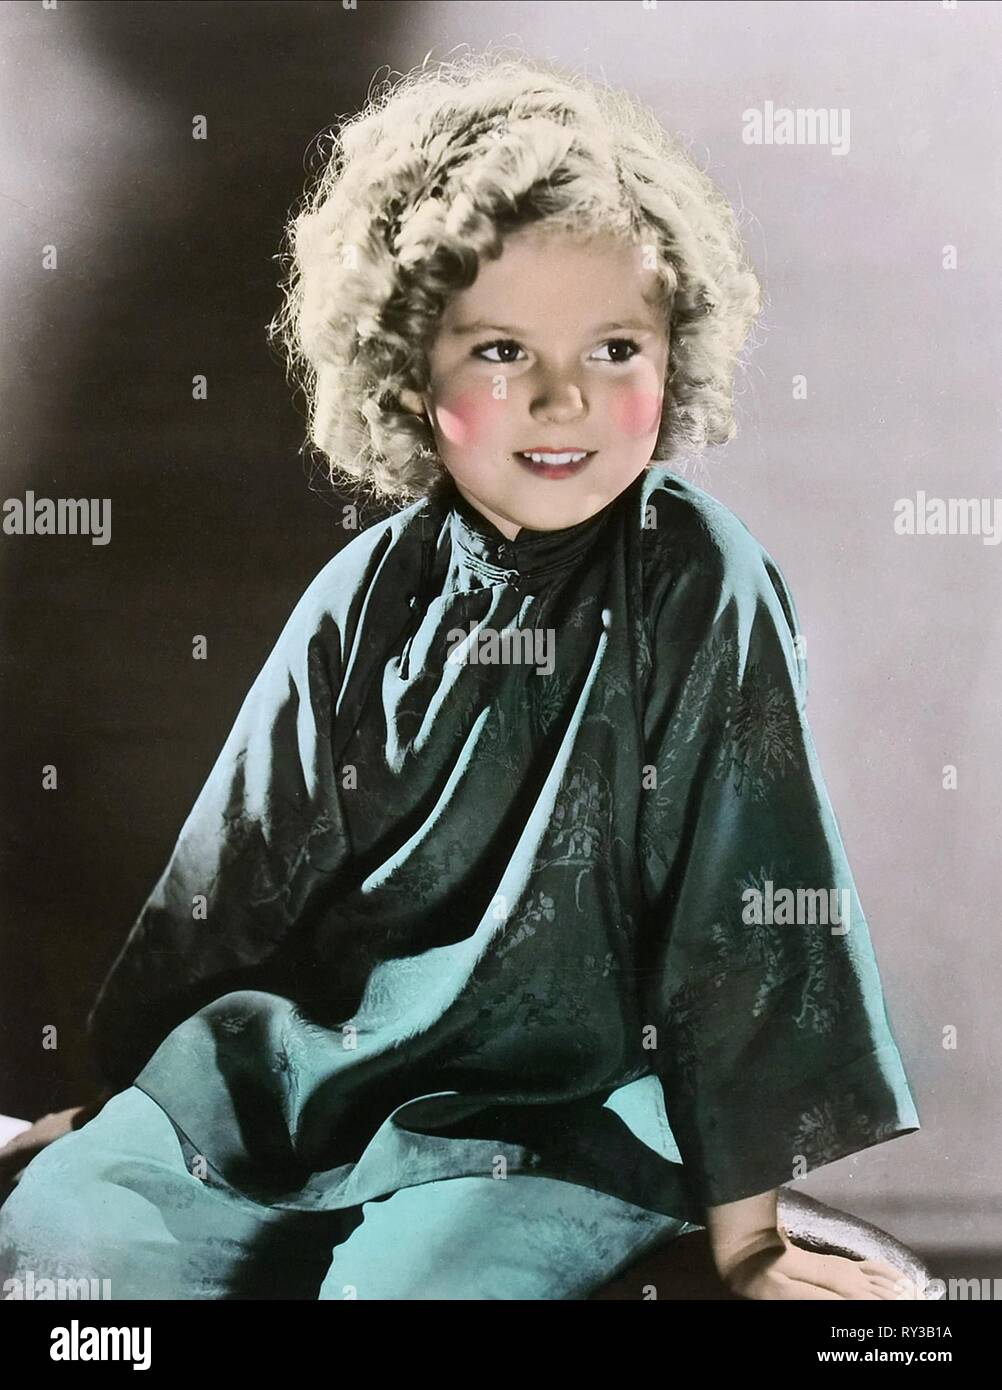 SHIRLEY TEMPLE, passager clandestin, 1936 Banque D'Images